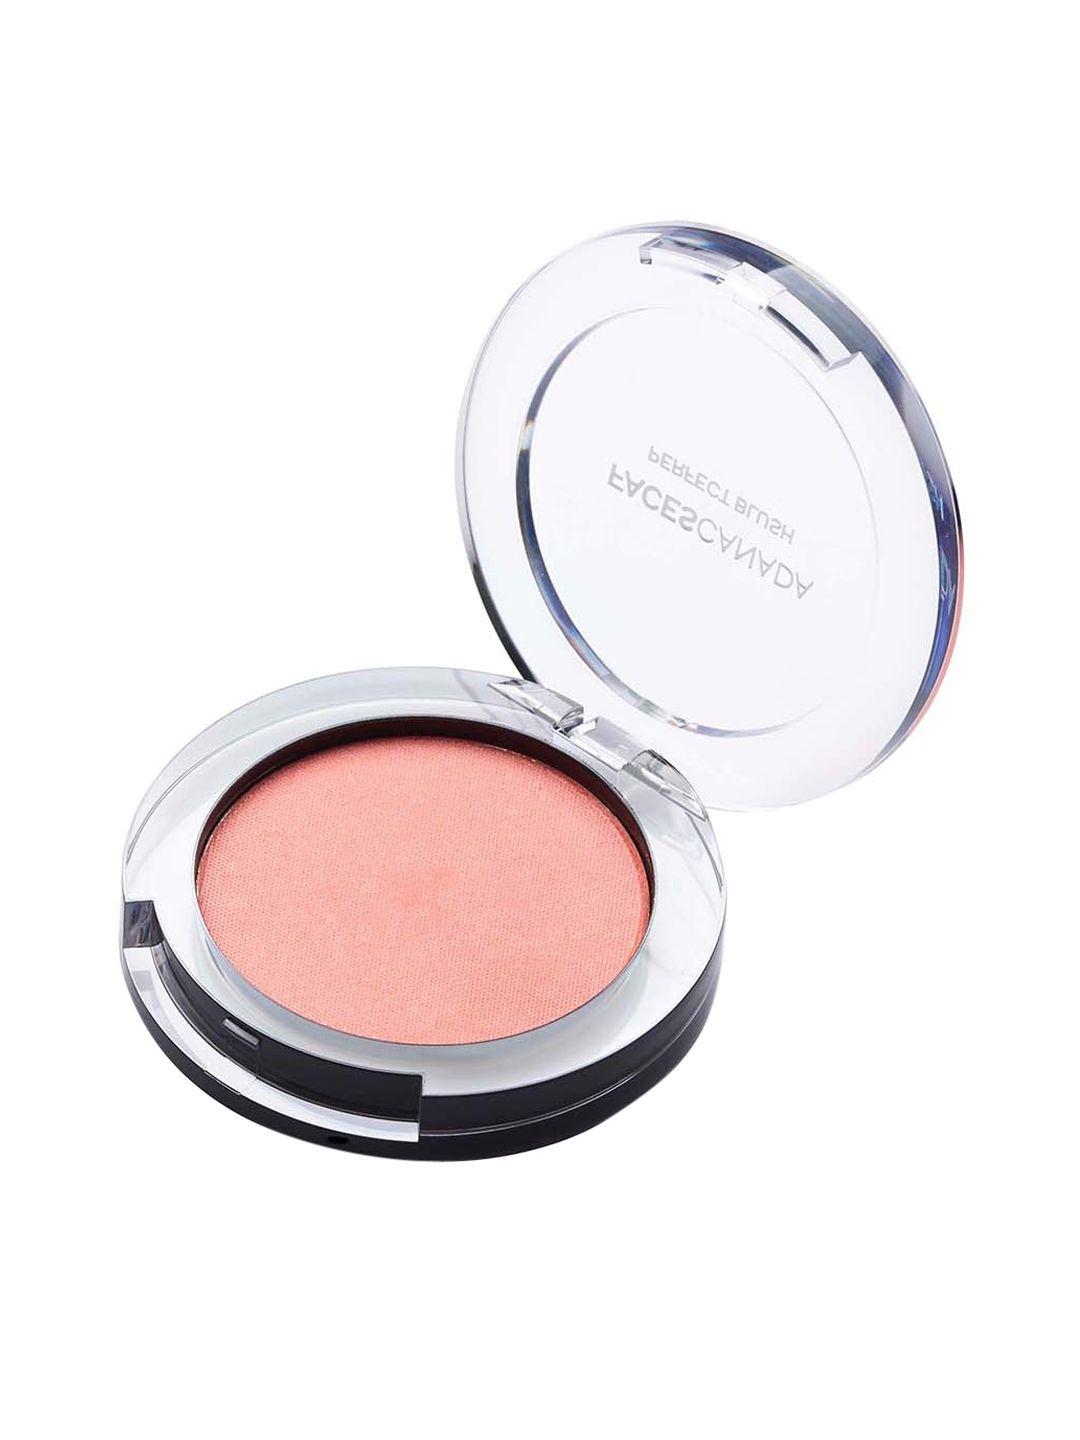 faces canada perfect blush - silky smooth texture - 5g - cocktail peach 04